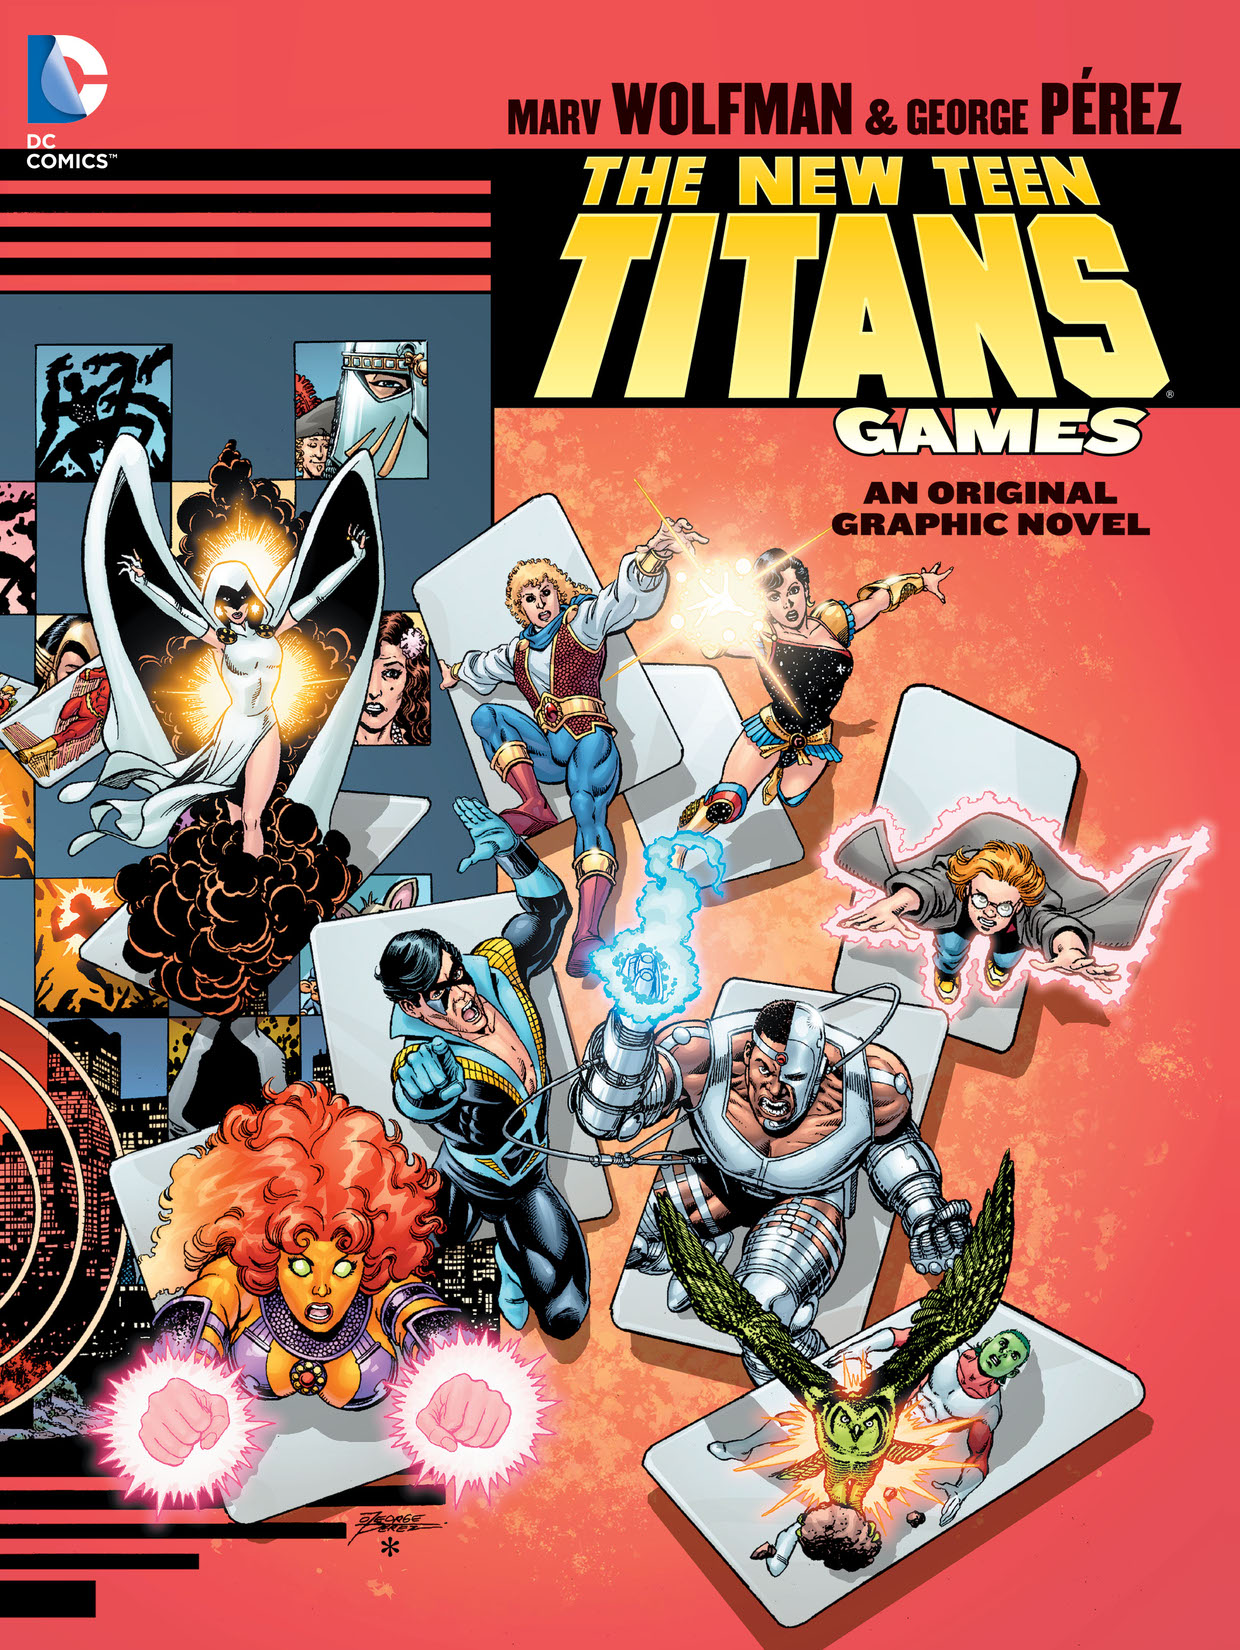 The New Teen Titans: Games preview images